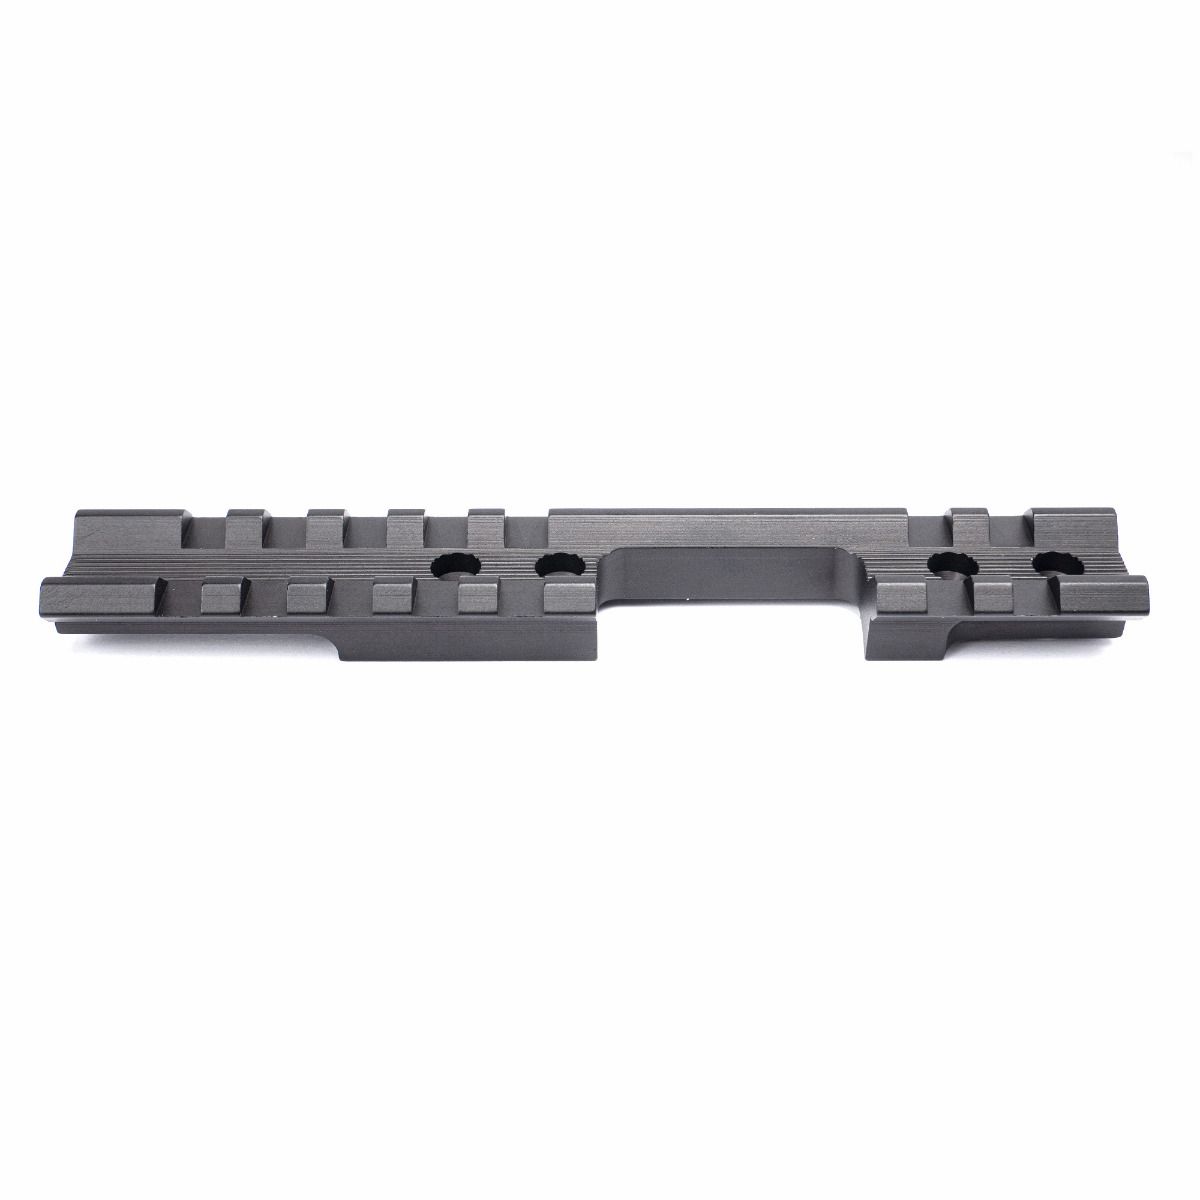 EGW Savage Rascal Picatinny Rail Scope Mount with Left Hand Cut Large Ejection Port Cutout